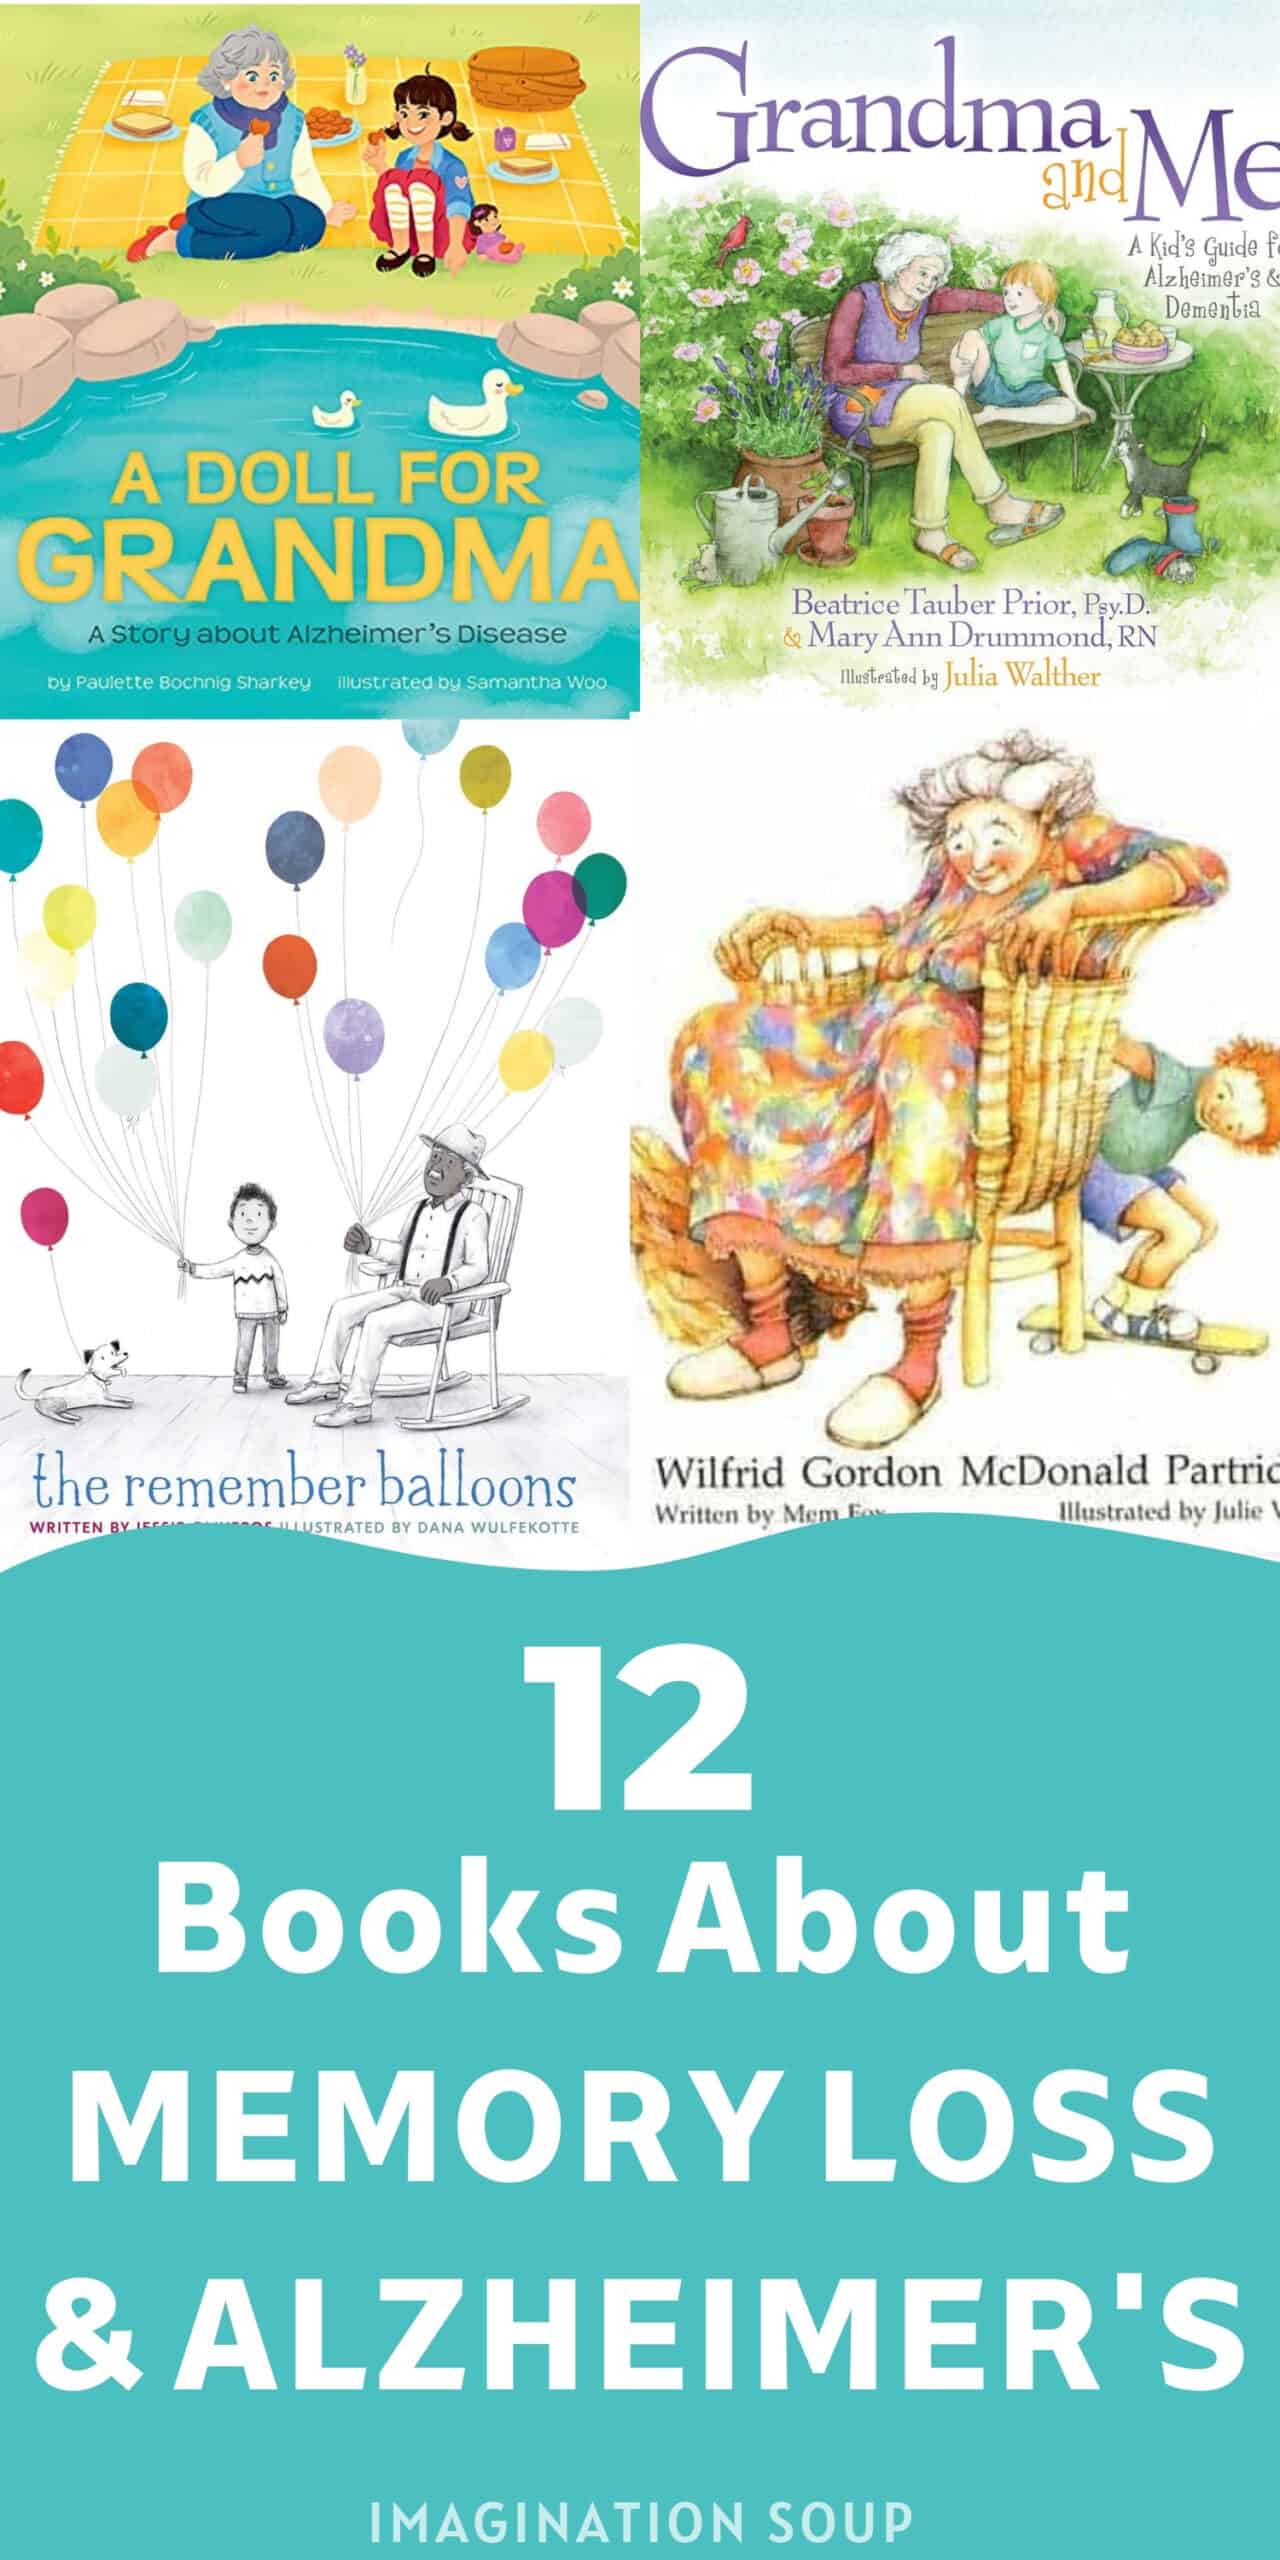 Children's Books About Aging, Memory Loss, and Alzheimer's